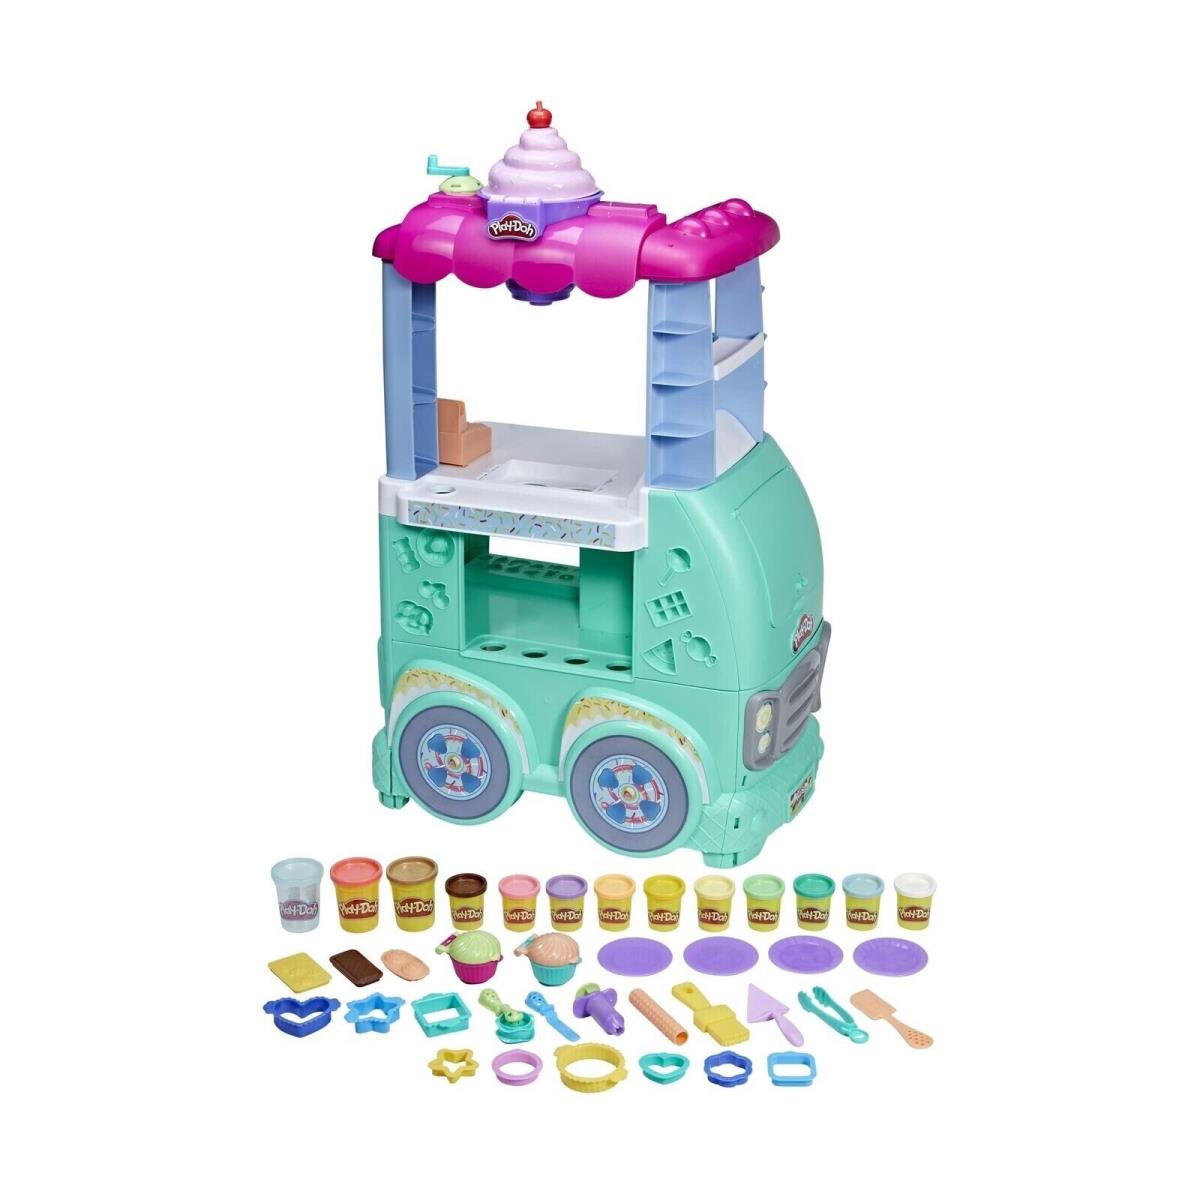 Play-doh Kitchen Creations Sweet Snacks Food Truck Toy Playset For Kids